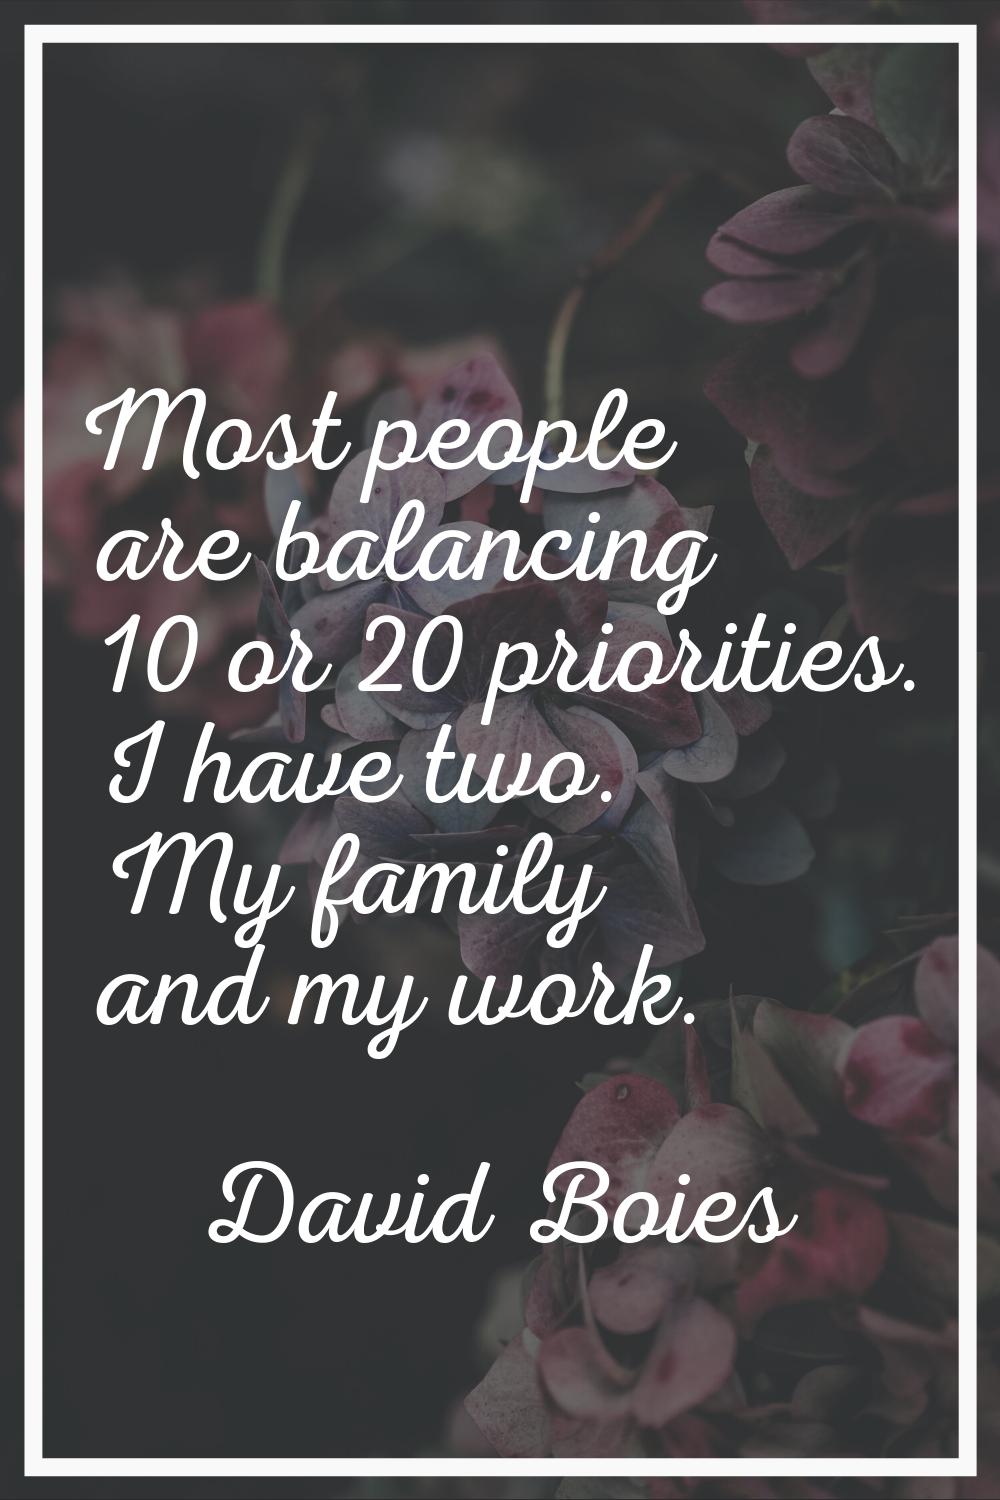 Most people are balancing 10 or 20 priorities. I have two. My family and my work.